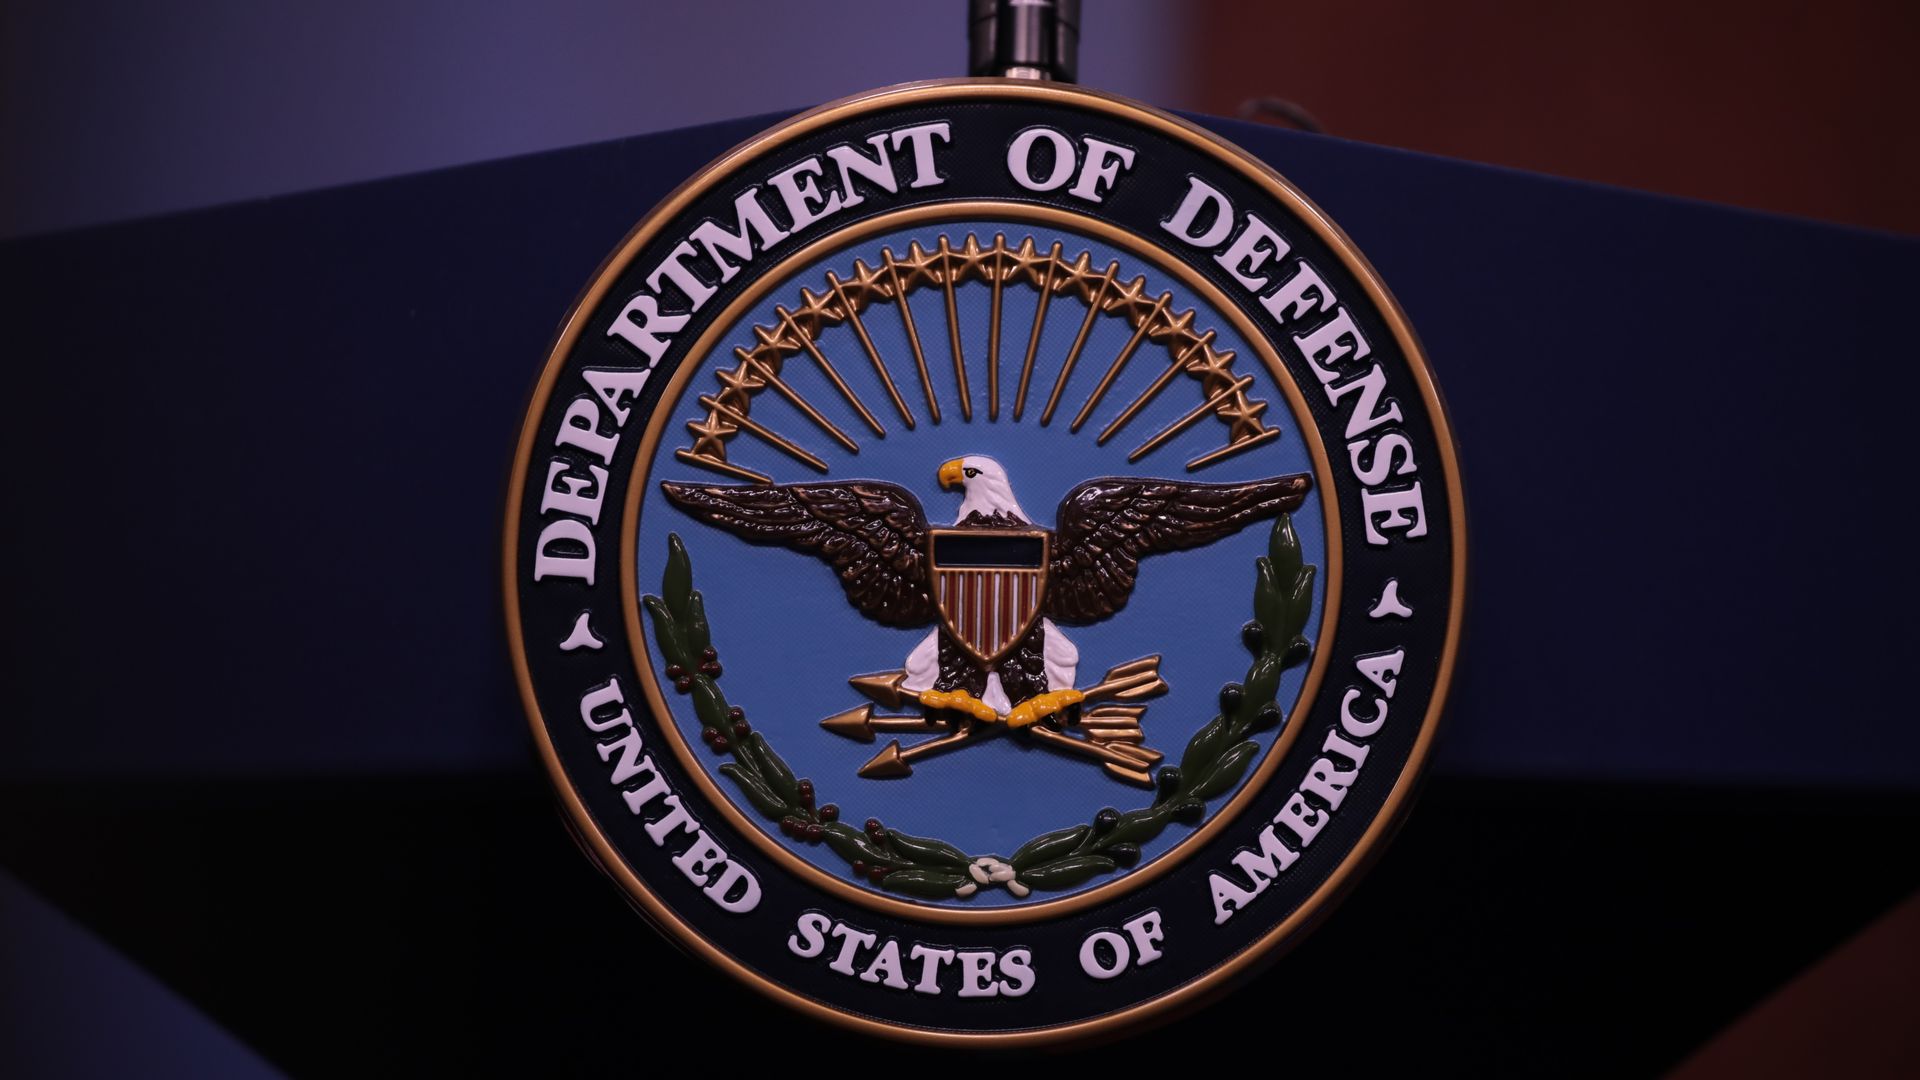 The Department of Defense seal.